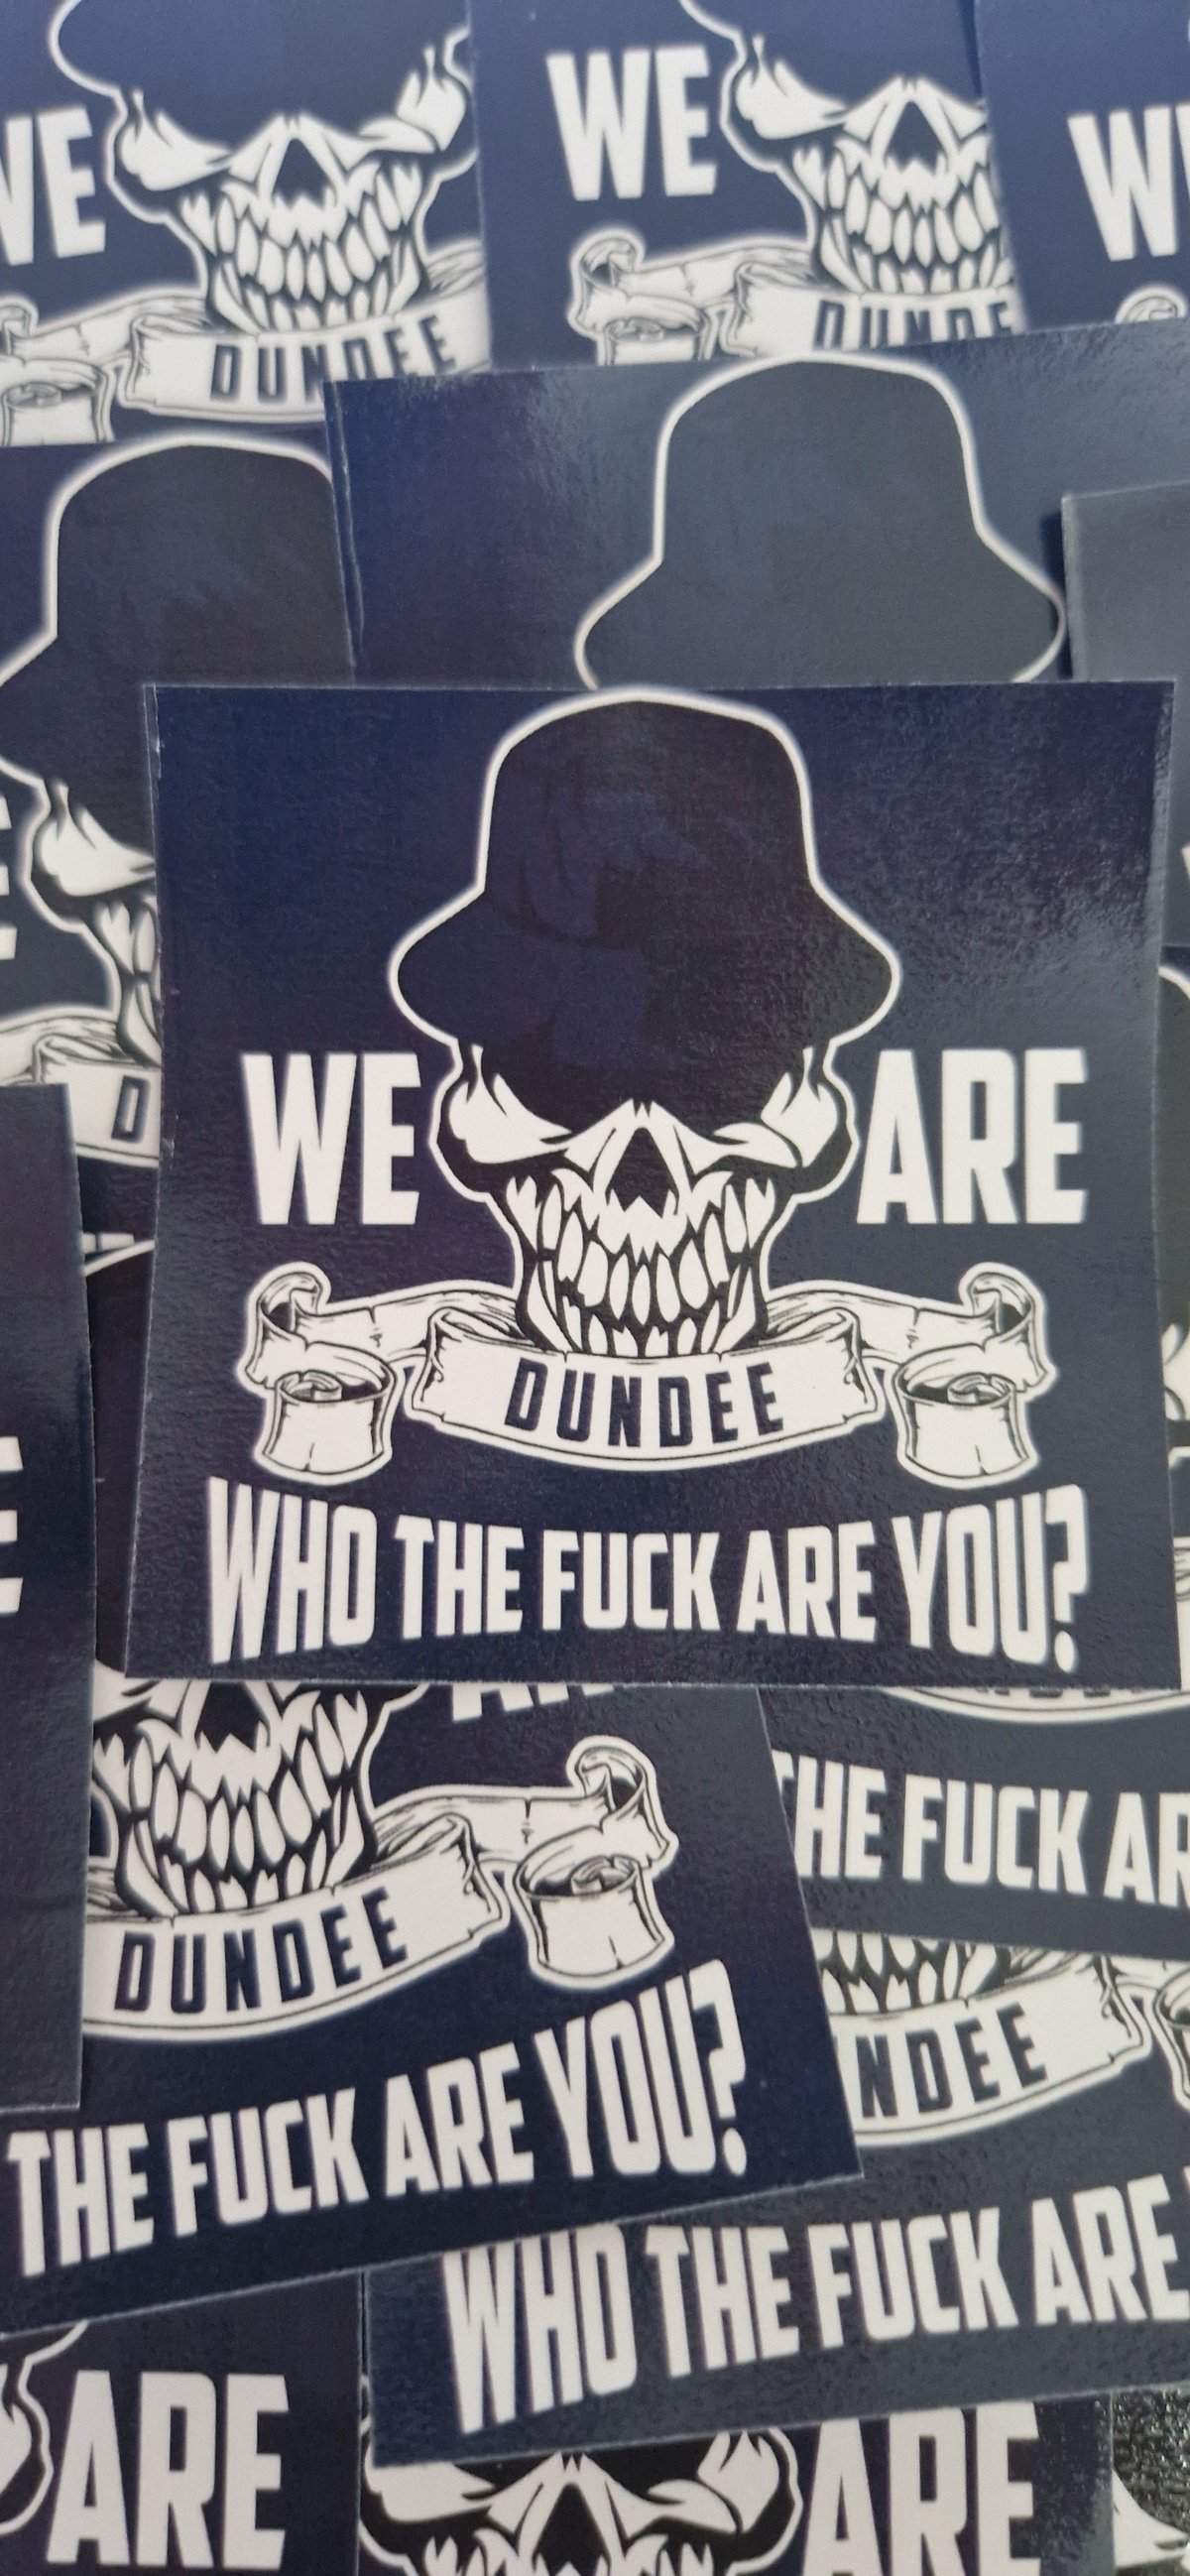 Pack of 25 7x7cm We are Dundee Football/Ultras Stickers.